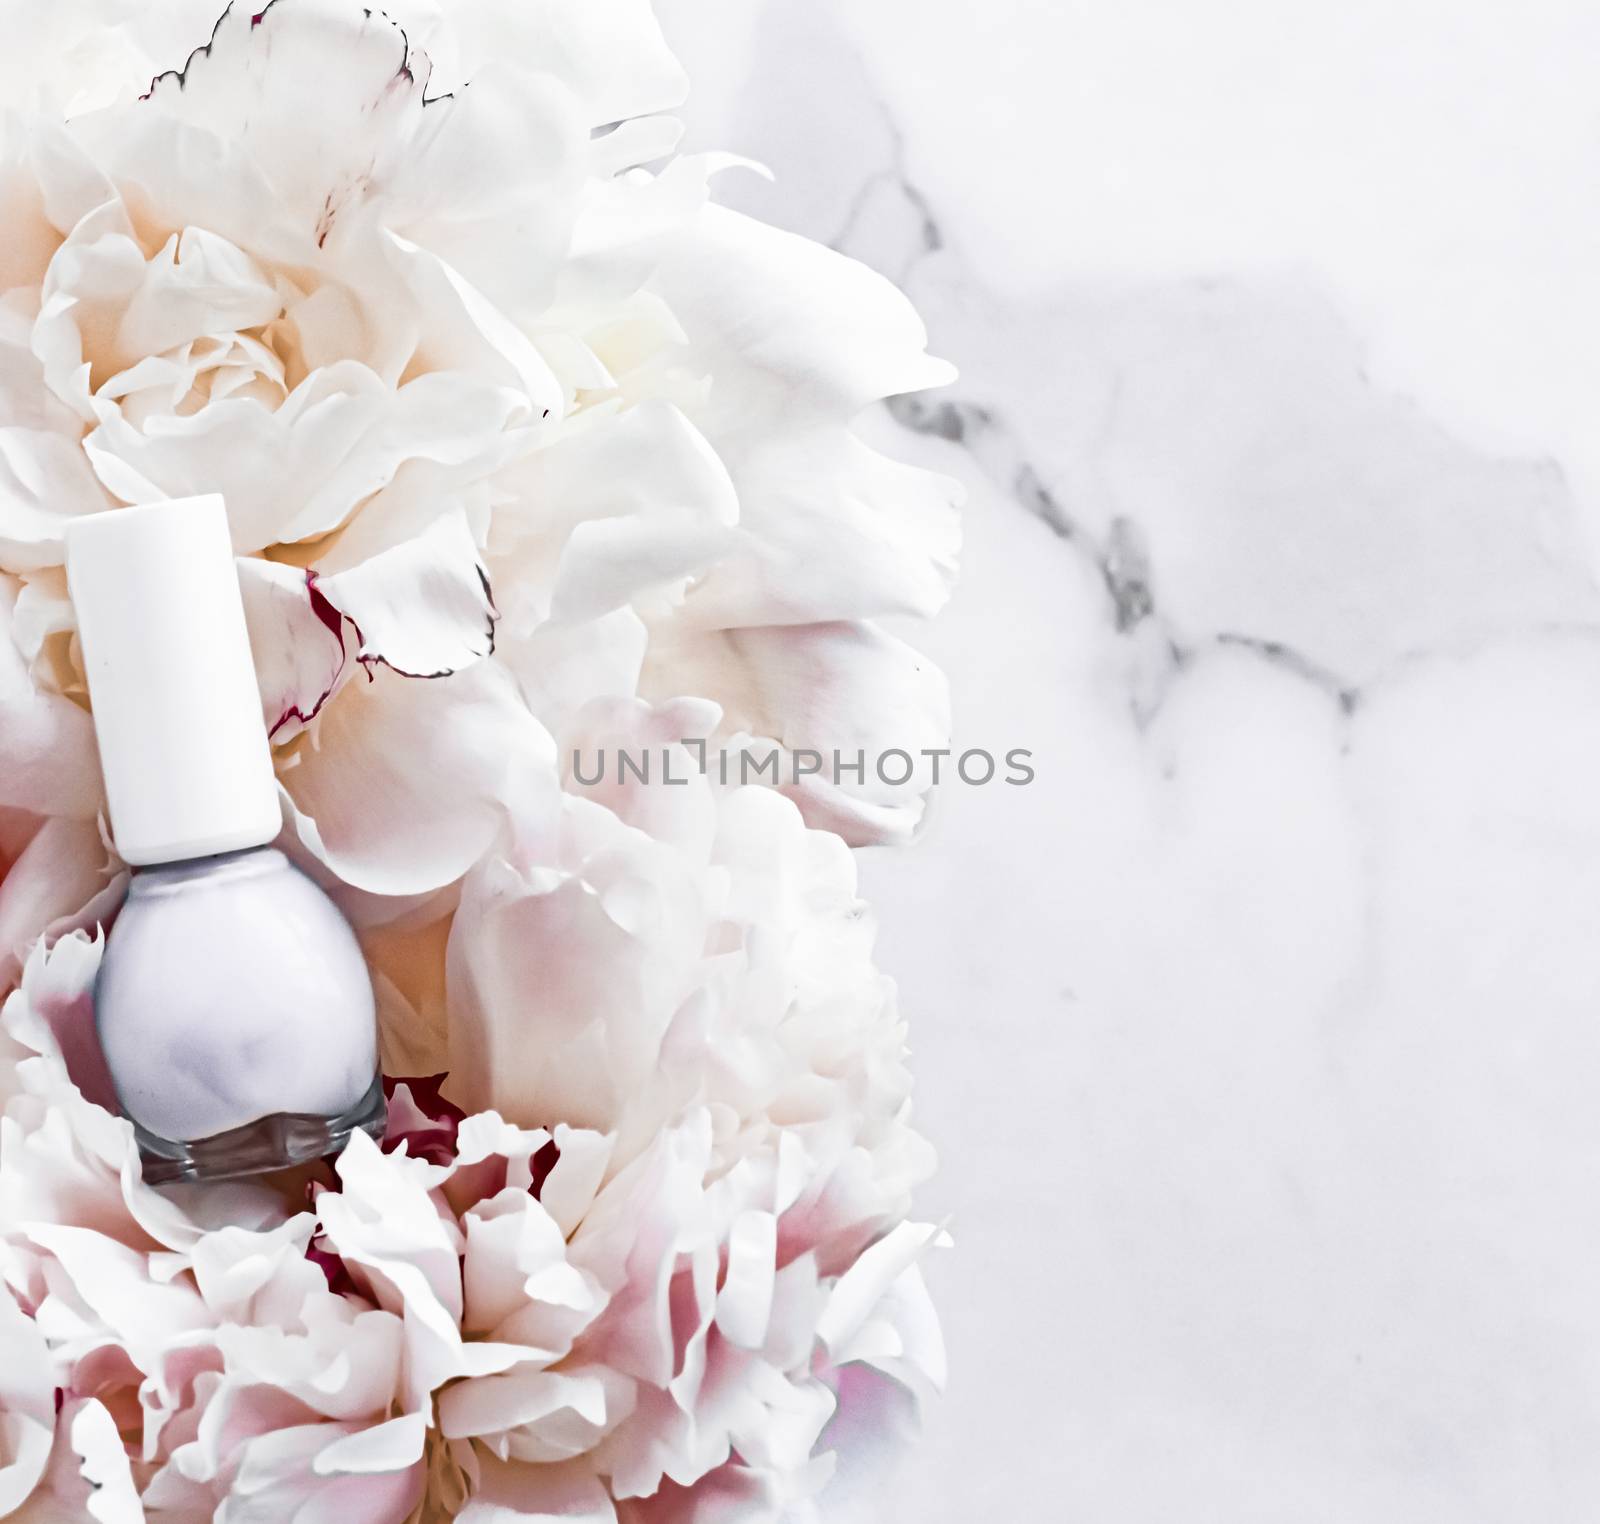 Nail polish bottles on floral background, french manicure and cosmetic branding by Anneleven